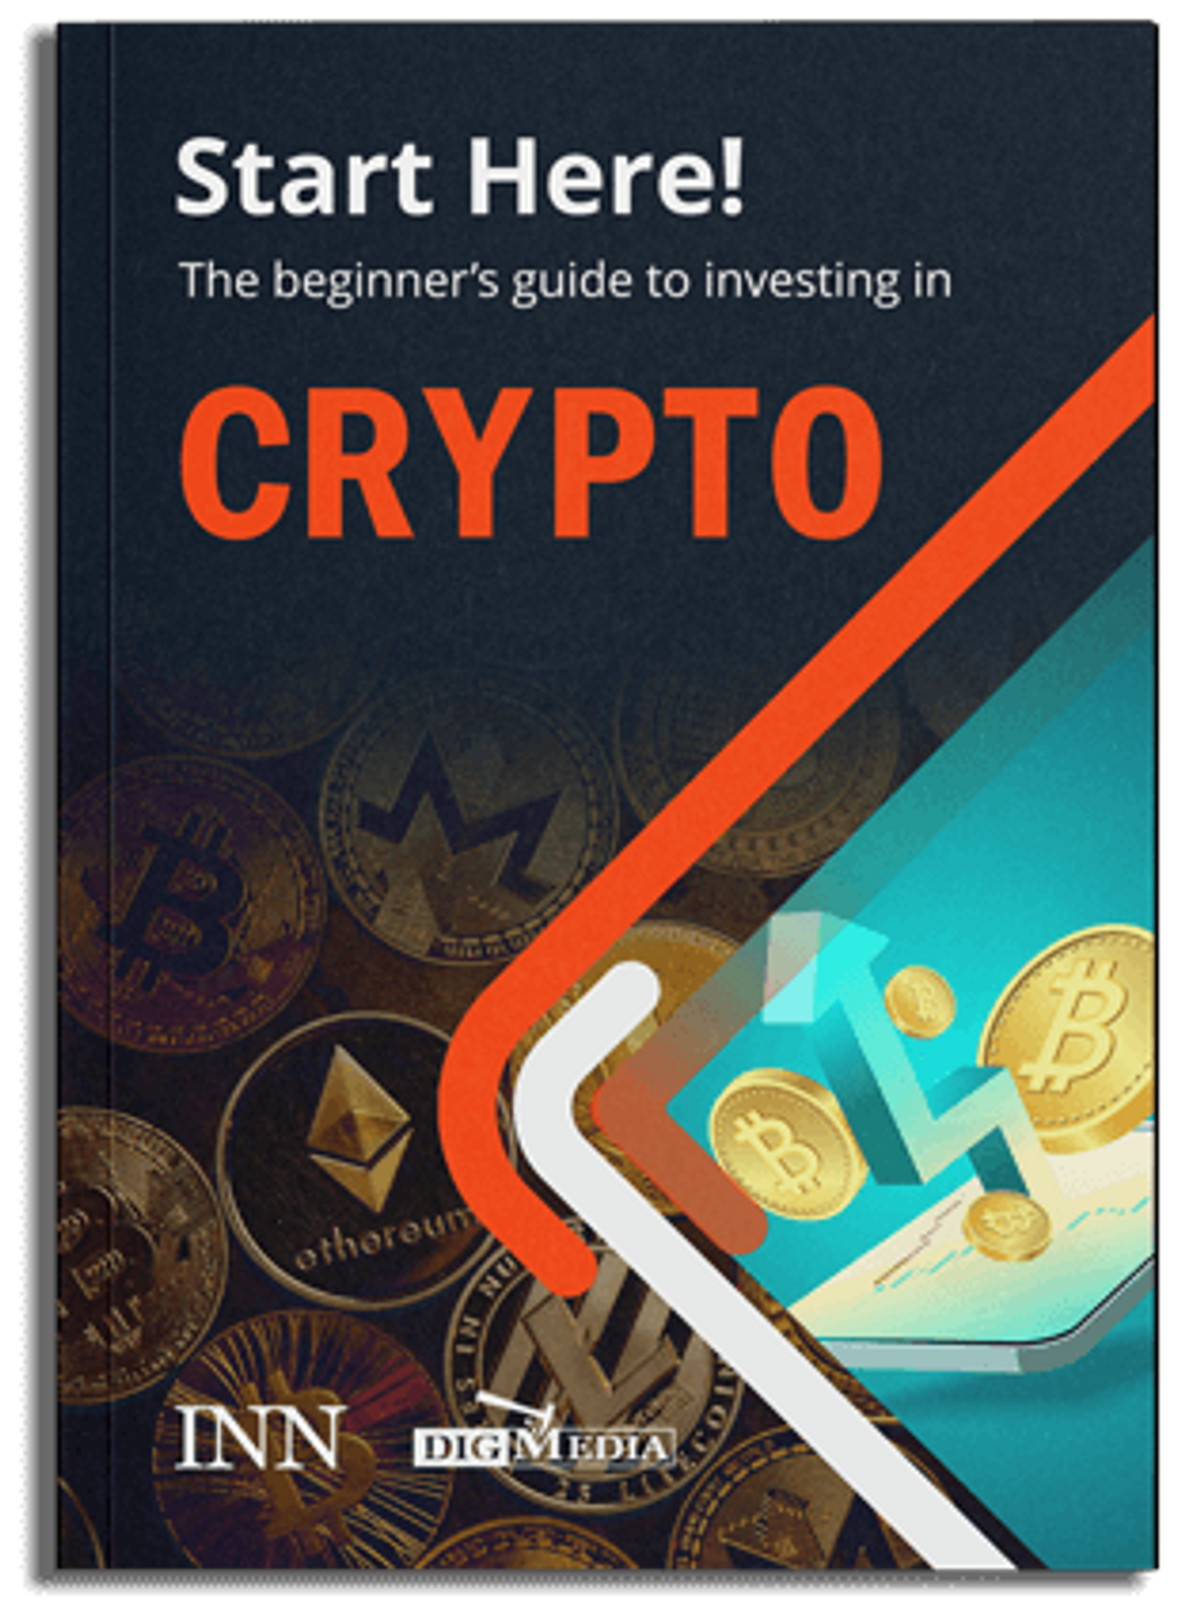  The Beginner's Guide to Investing In Crypto